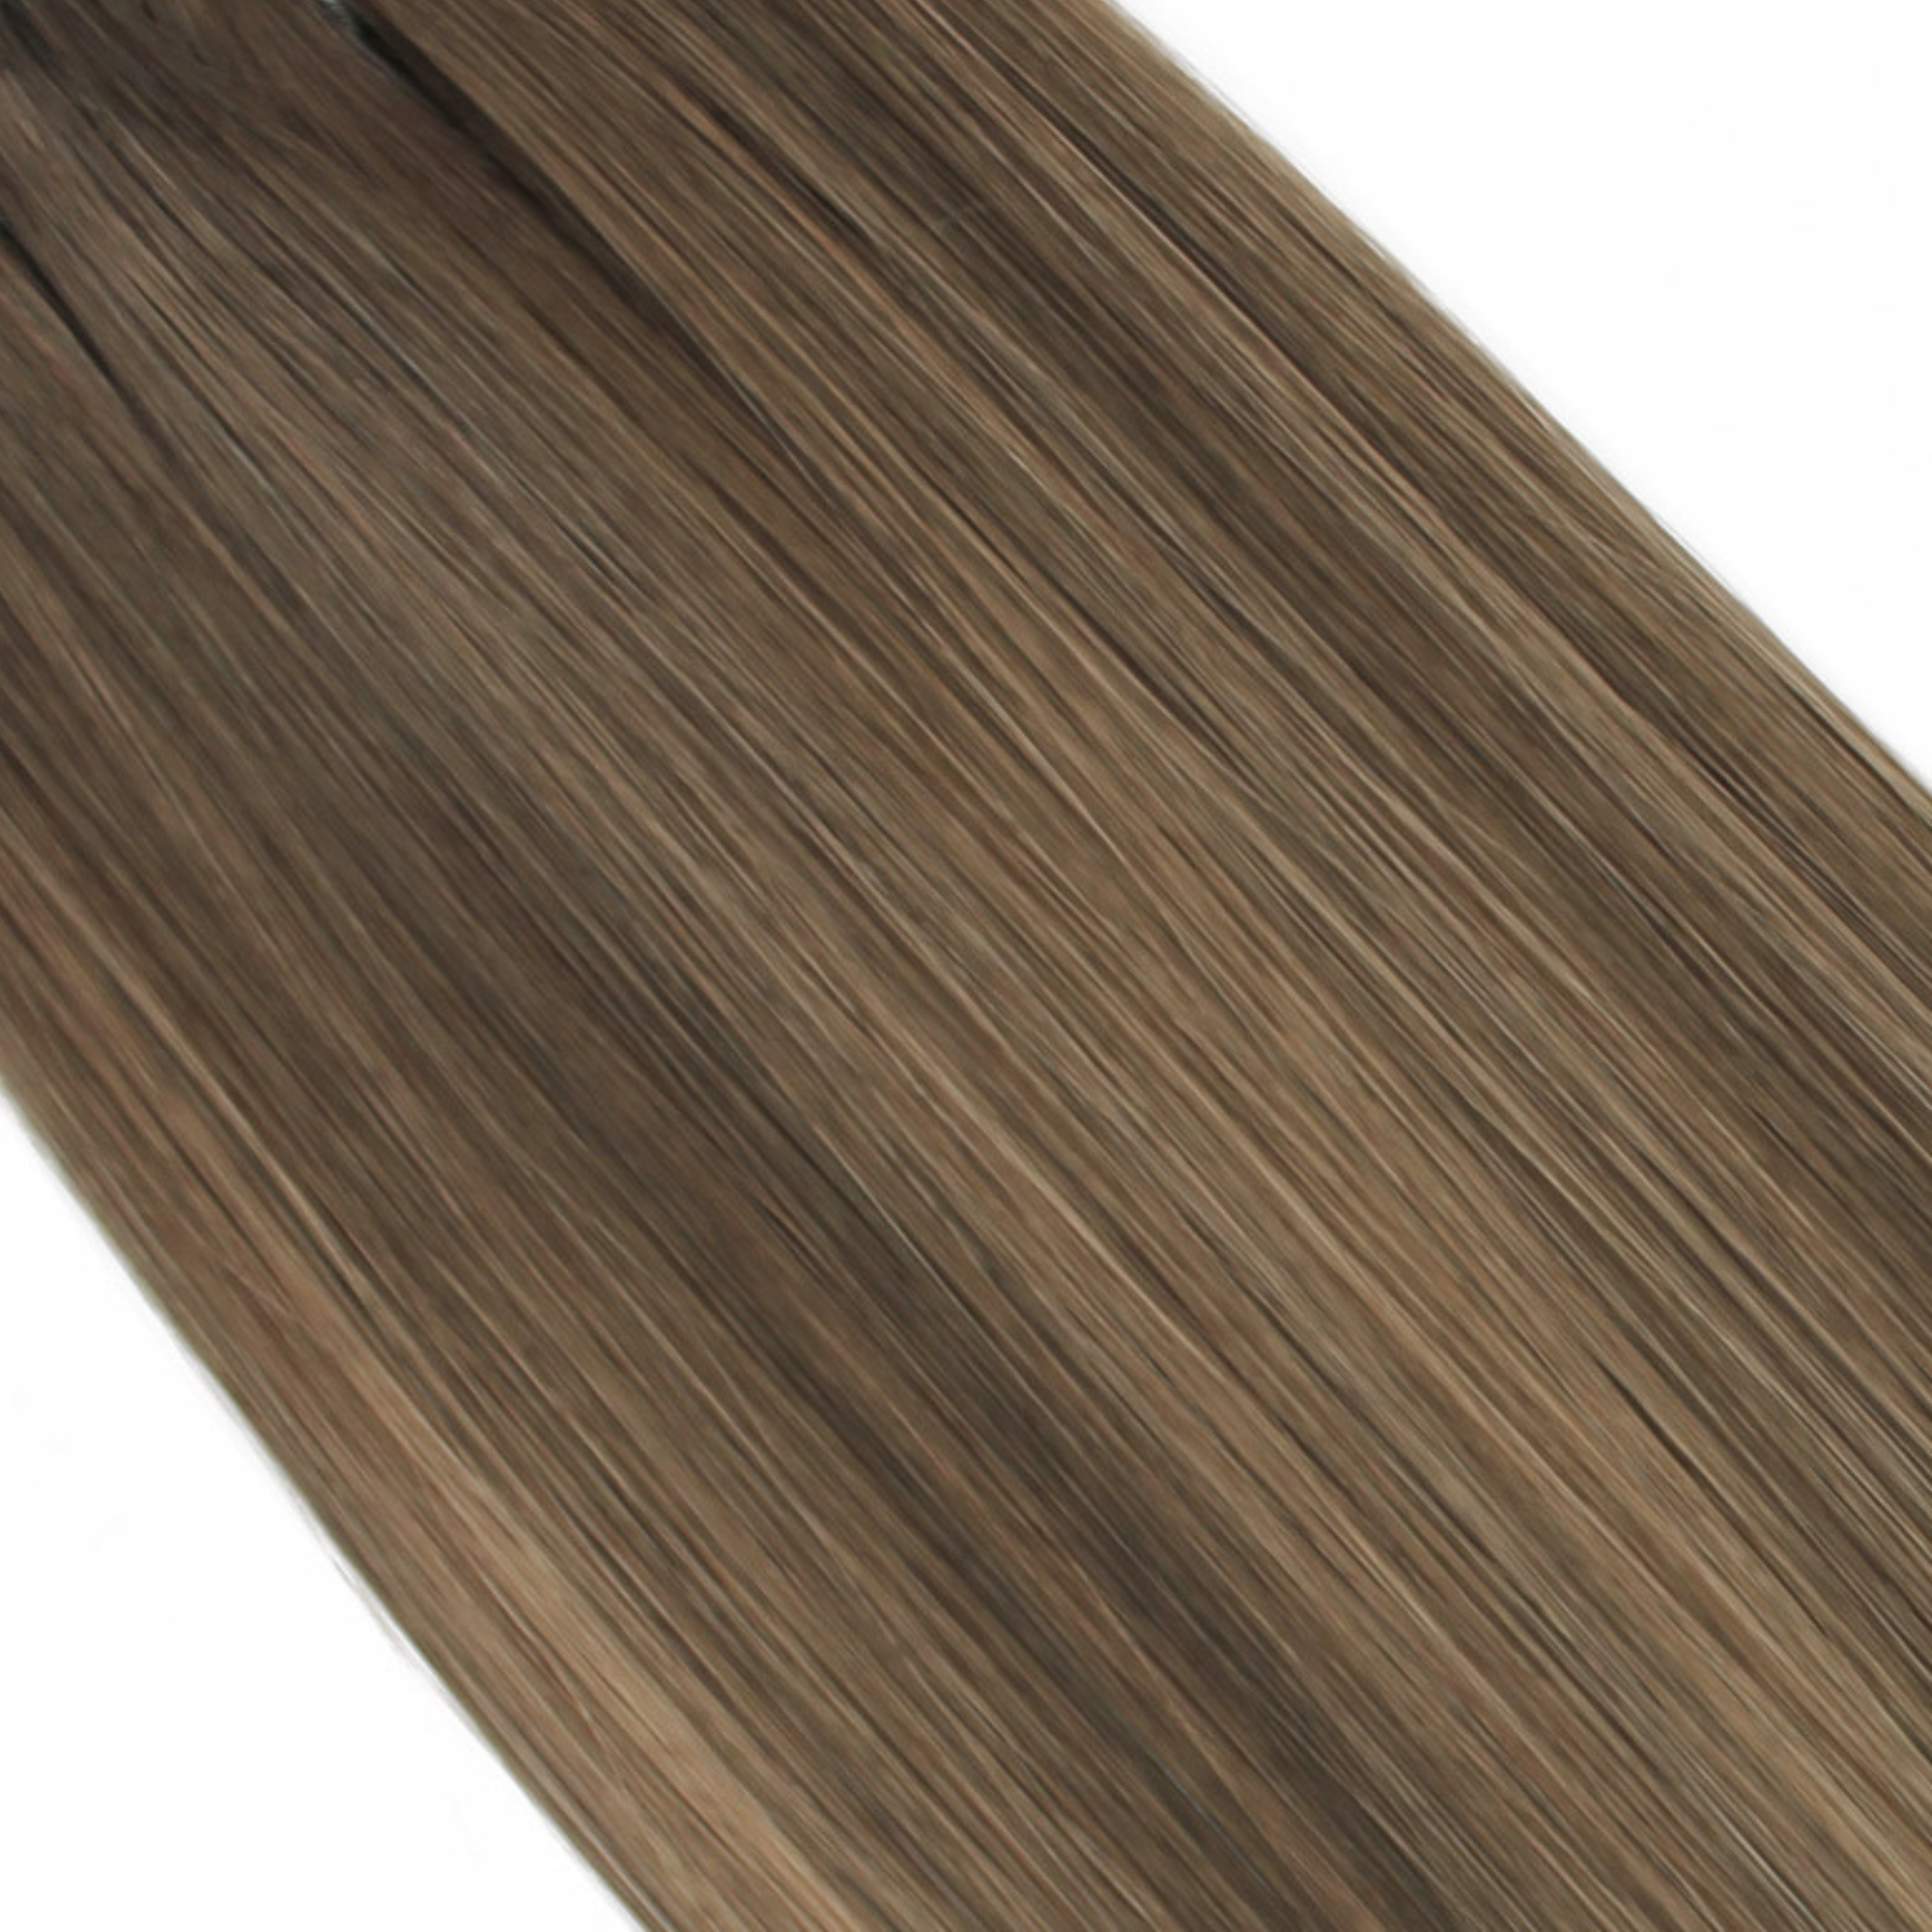 "hair rehab london 22" weft hair extensions shade swatch titled rooted caramel"